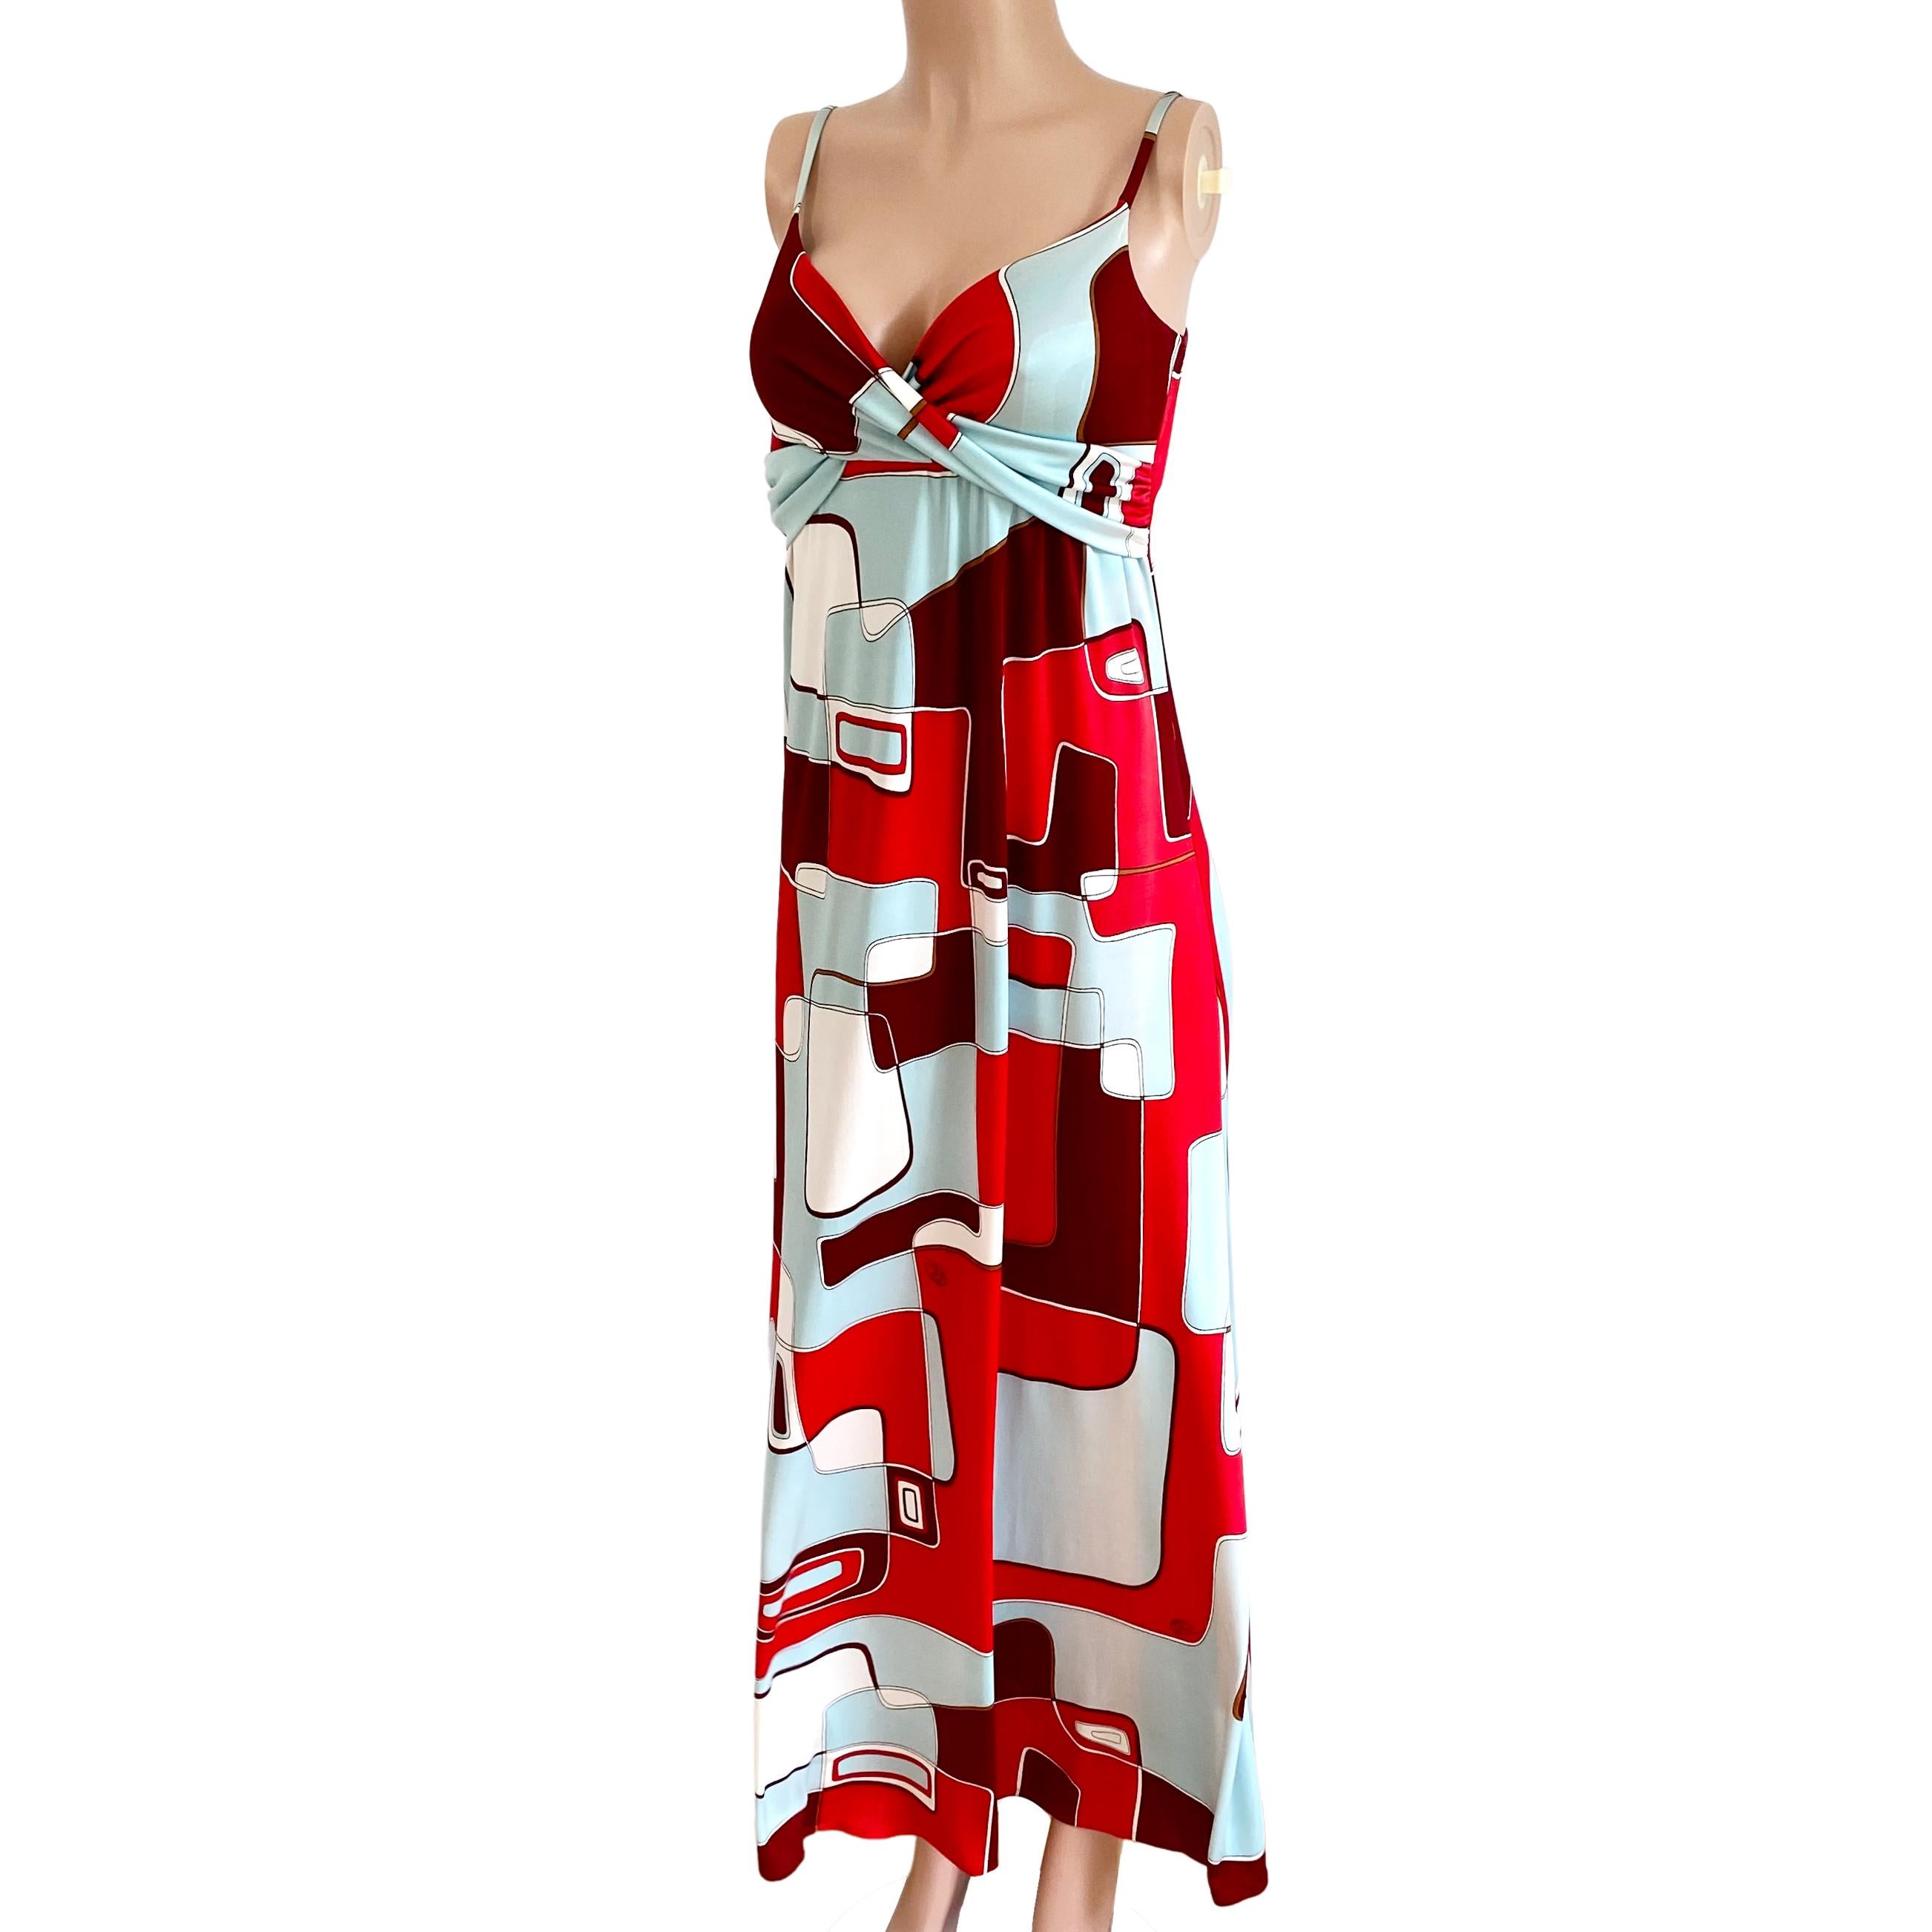 Easy Breezy beautiful maxi dress in luxurious silk jersey.
Abstract red aqua print silk jersey boho maxi dress
Original freehand signed print from Flora Kung.
Adjustable straps for a perfect fit.
Approximately 60